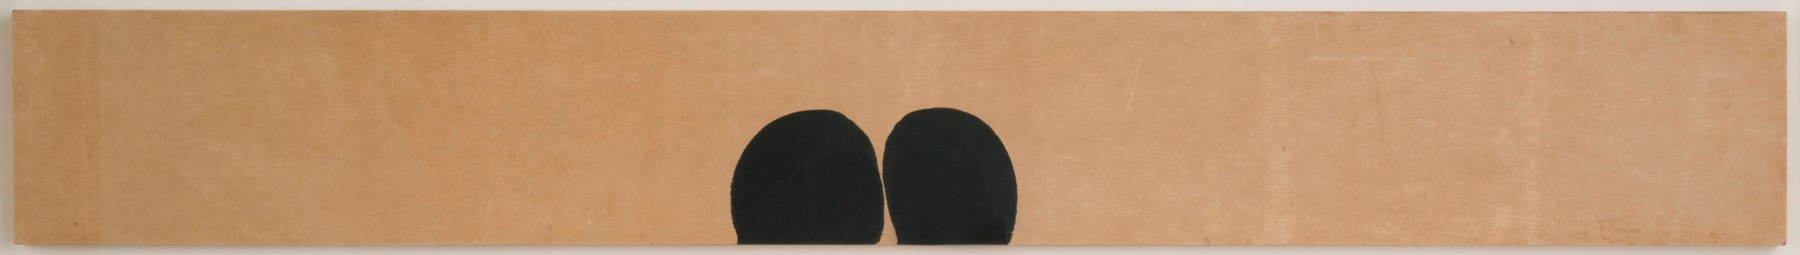 James Lee Byars

&amp;ldquo;Untitled&amp;rdquo;, ca. 1960

Ink on Japanese paper

9 x 68 3/4 inches

23 x 177 cm

JBZ 292